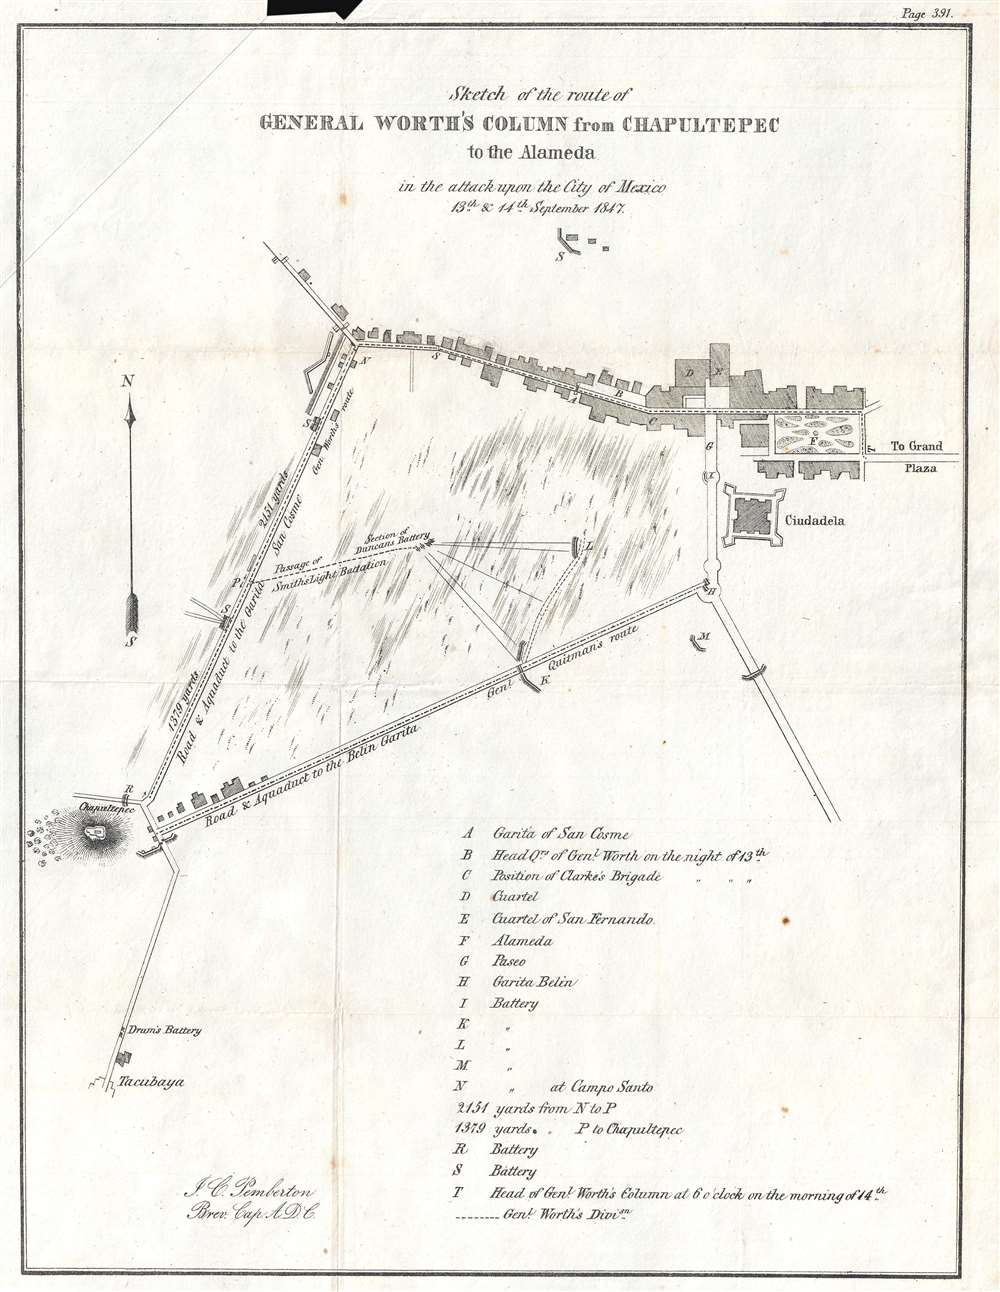 Sketch of the route of General Worth's Column from Chapultepec to the Alameda in the attack upon the City of Mexico 13th and 14th September 1847. - Main View